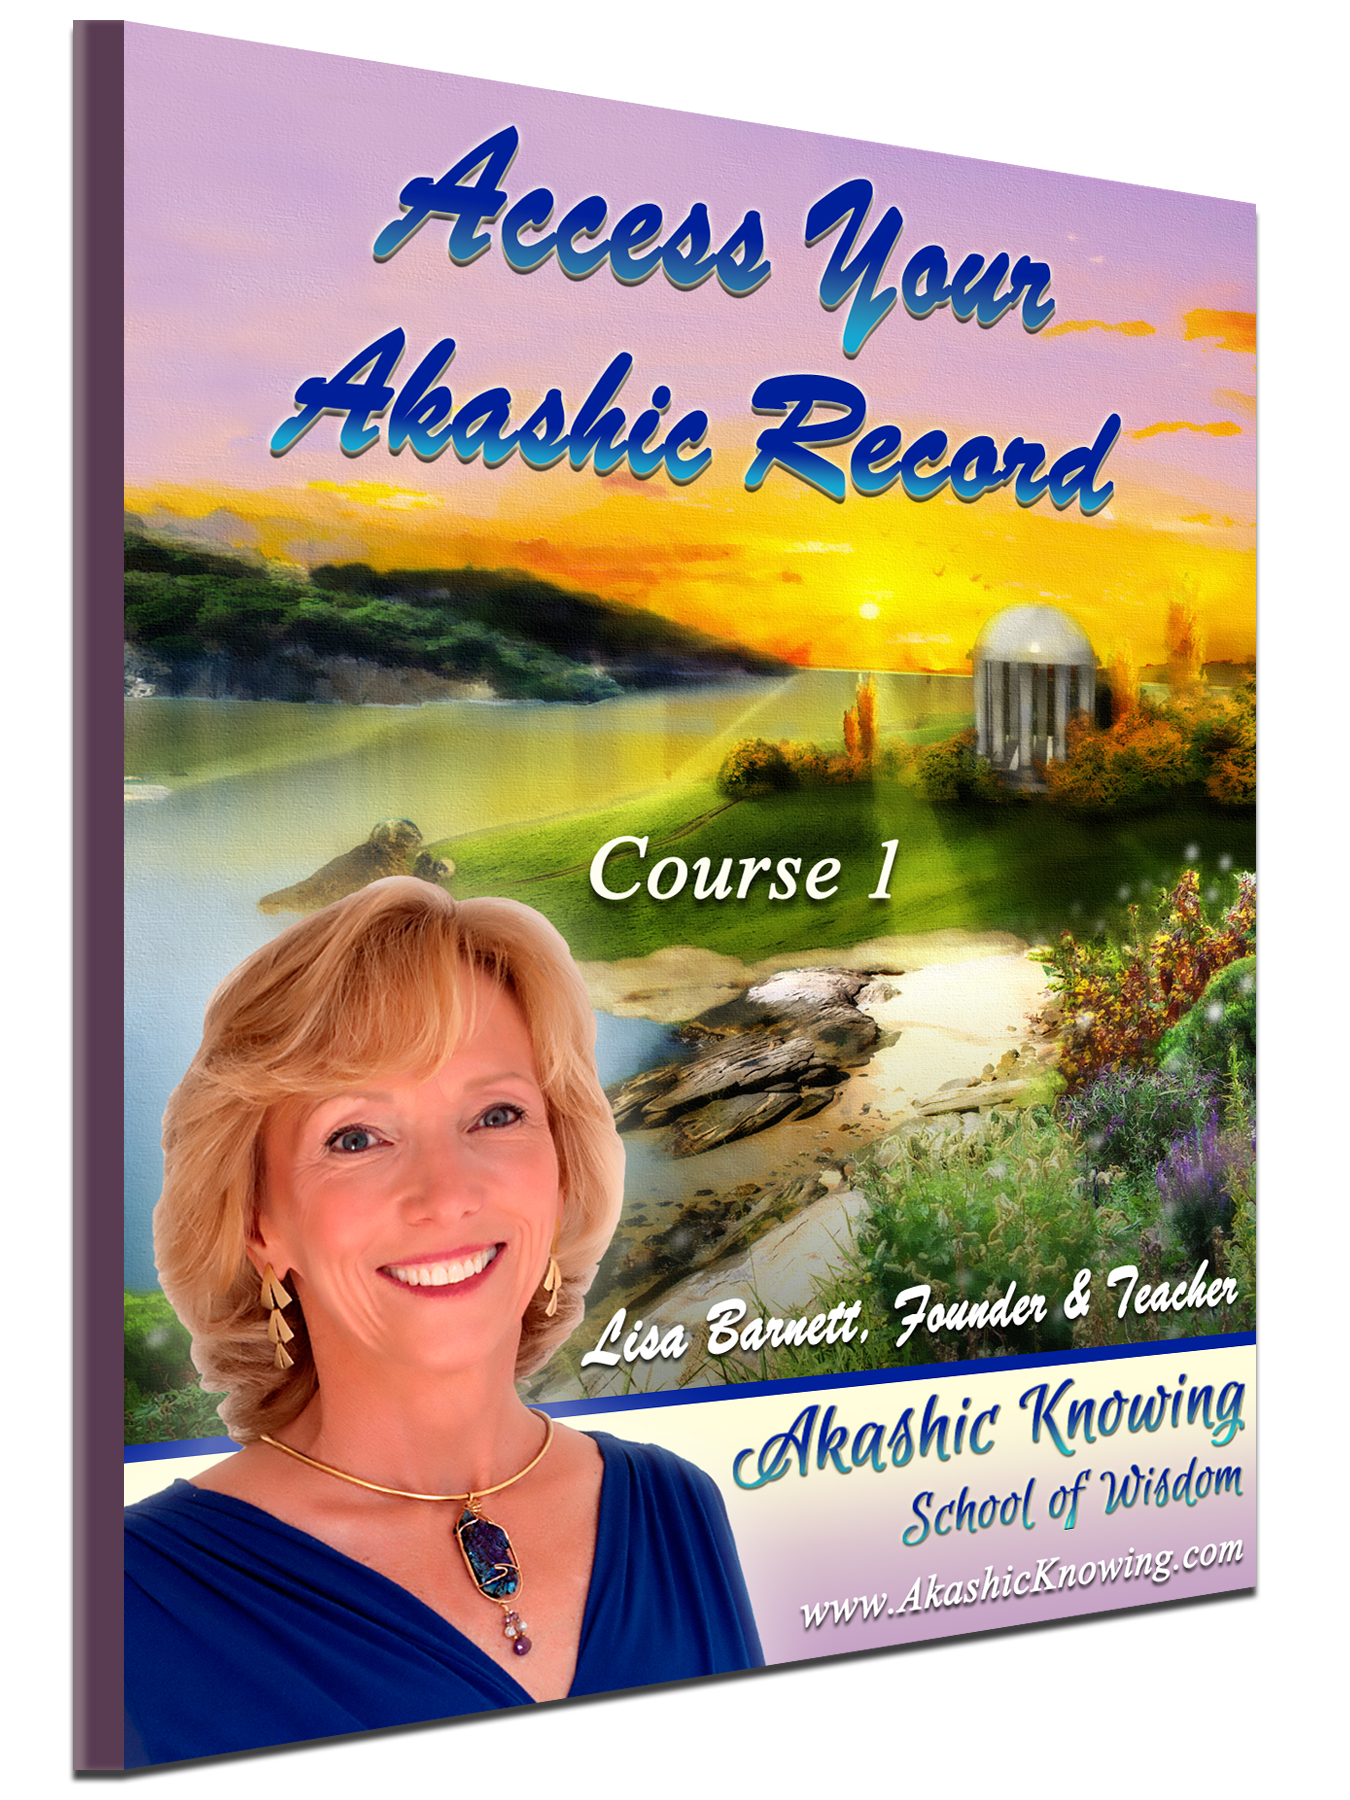 Lisa Barnett - Akashic Records: How to Access them, What they Mean, and How to Transform your Life, Now